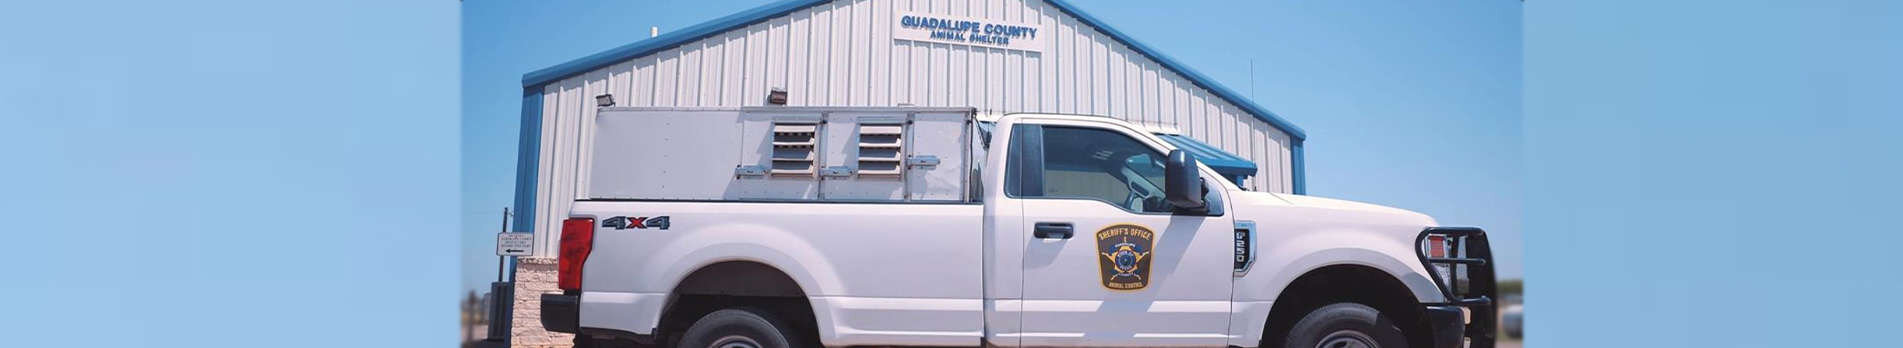 Guadalupe Sheriff truck in front of the animal shelter.